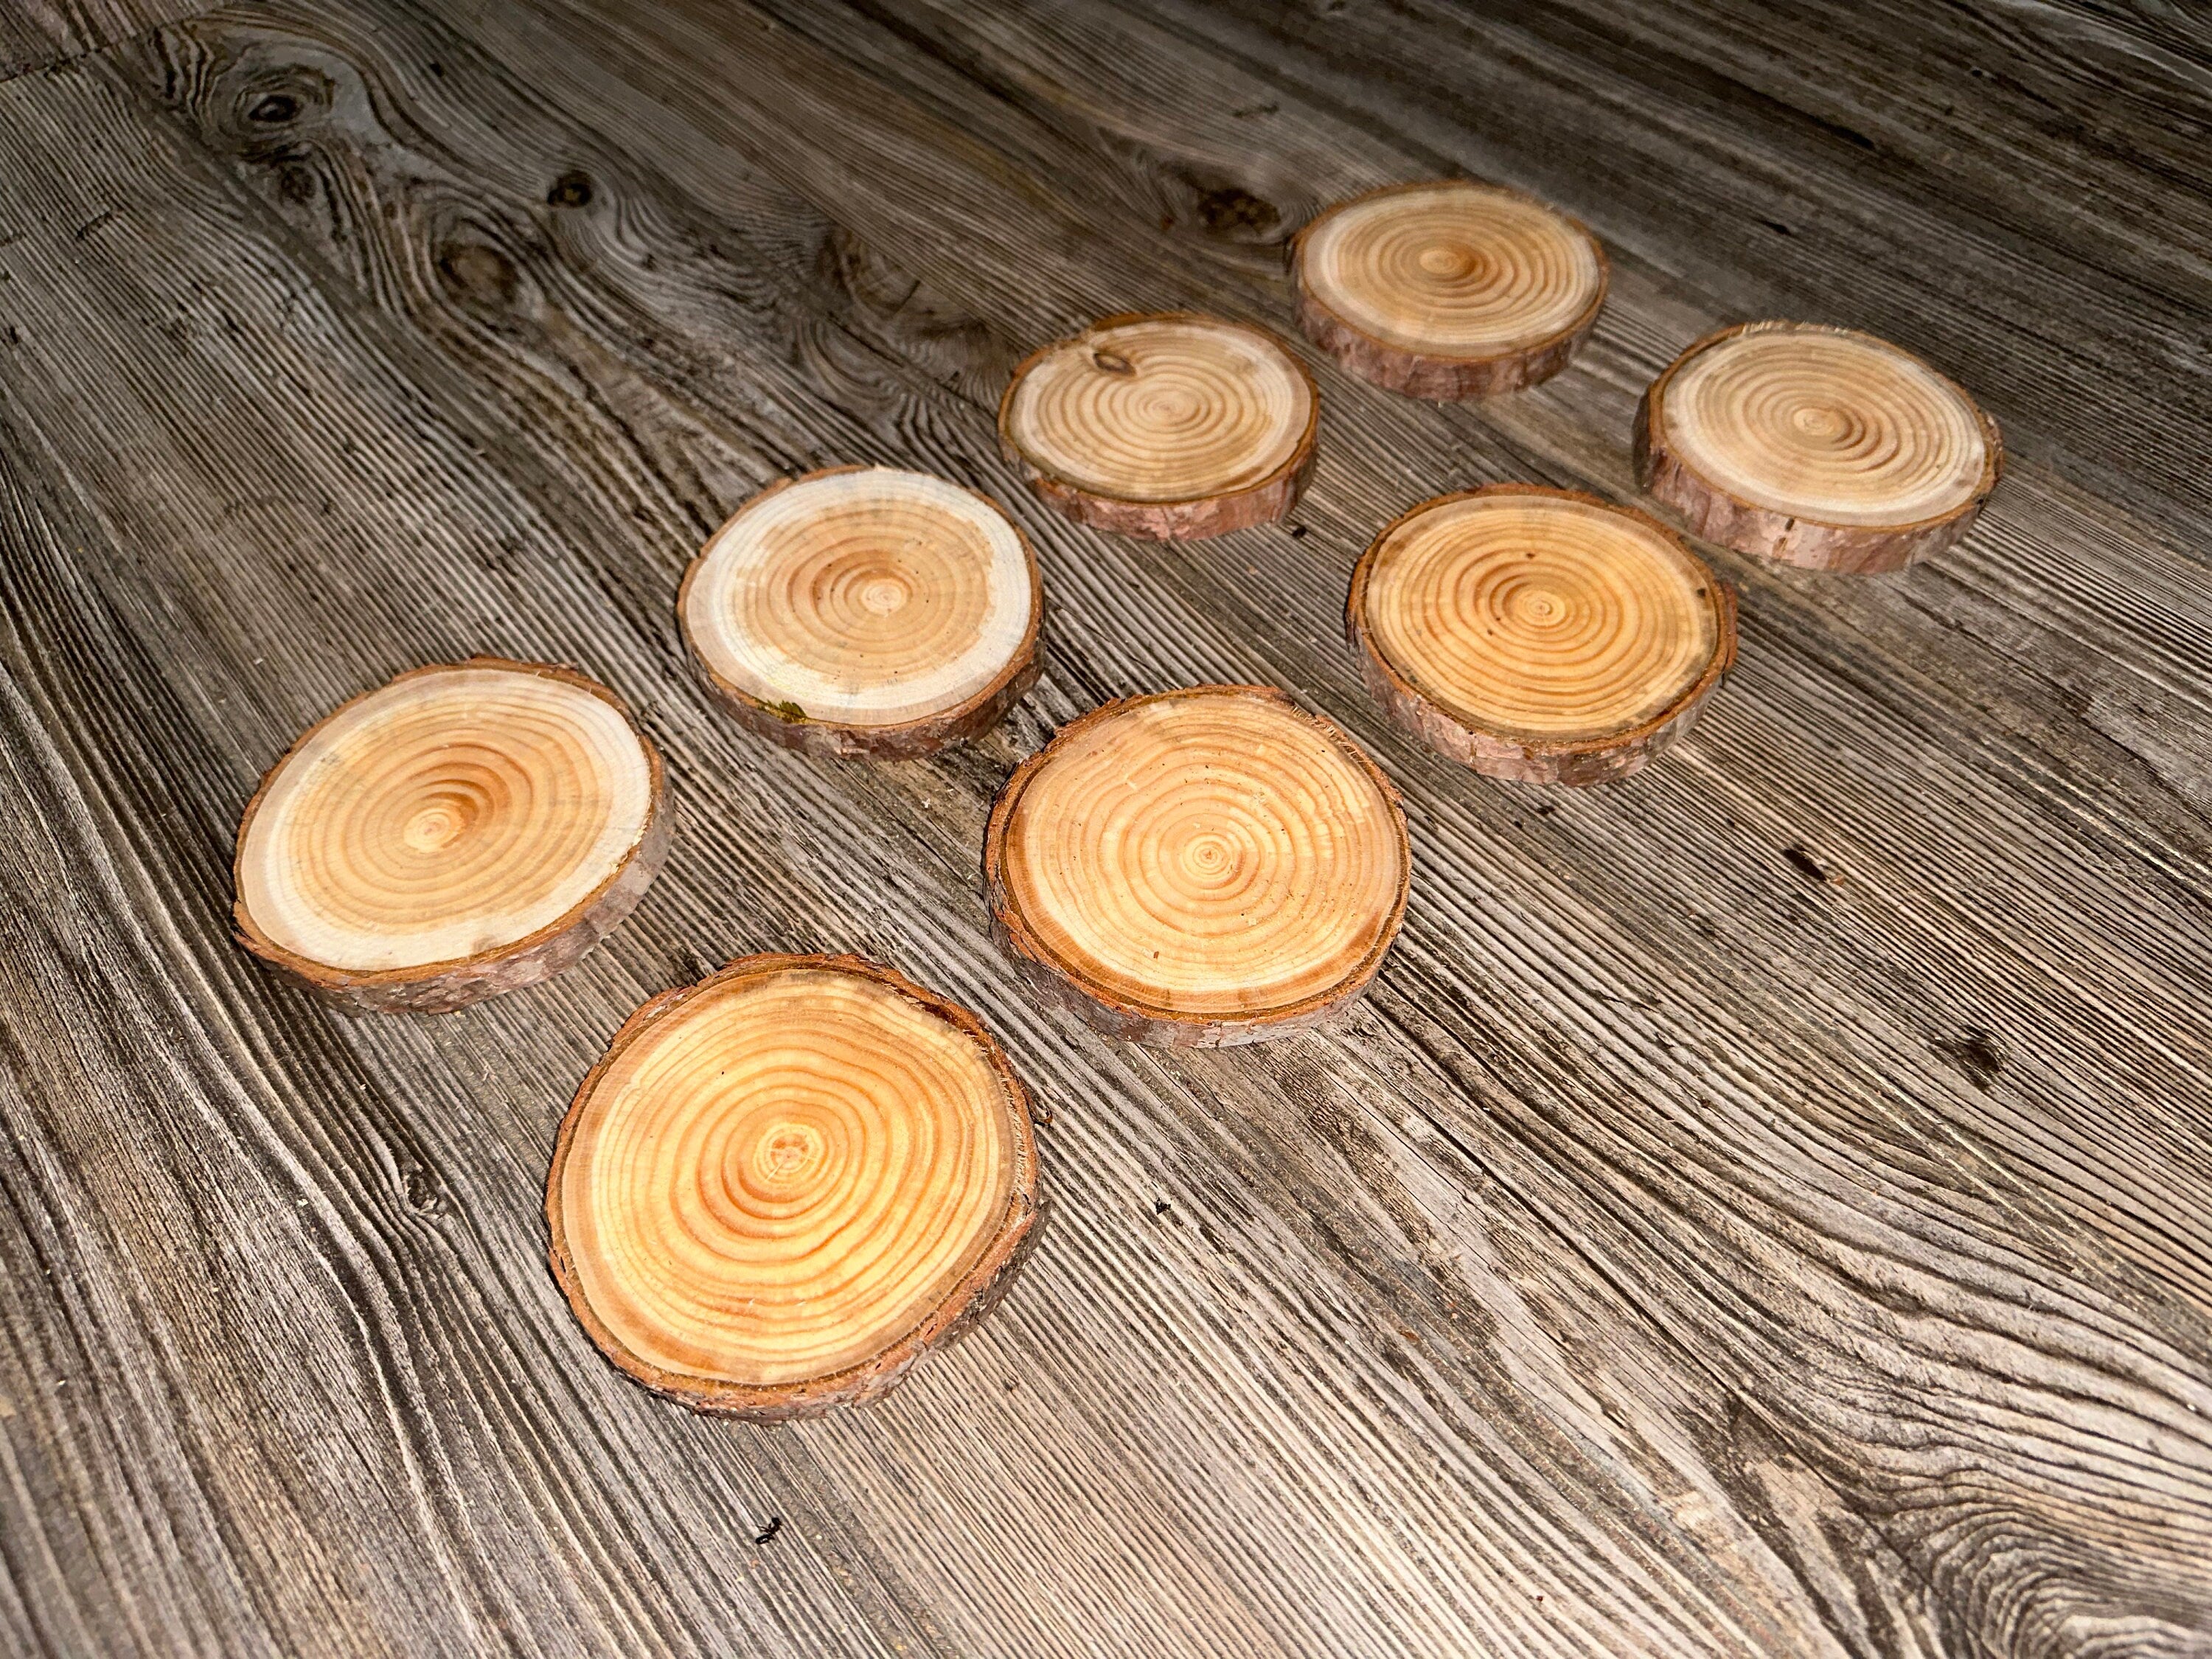 Red Pine Slices, Eight Count, Approximately 3-4 Inches Long by 3-4 Inches Wide and 1/2 Inch Tall